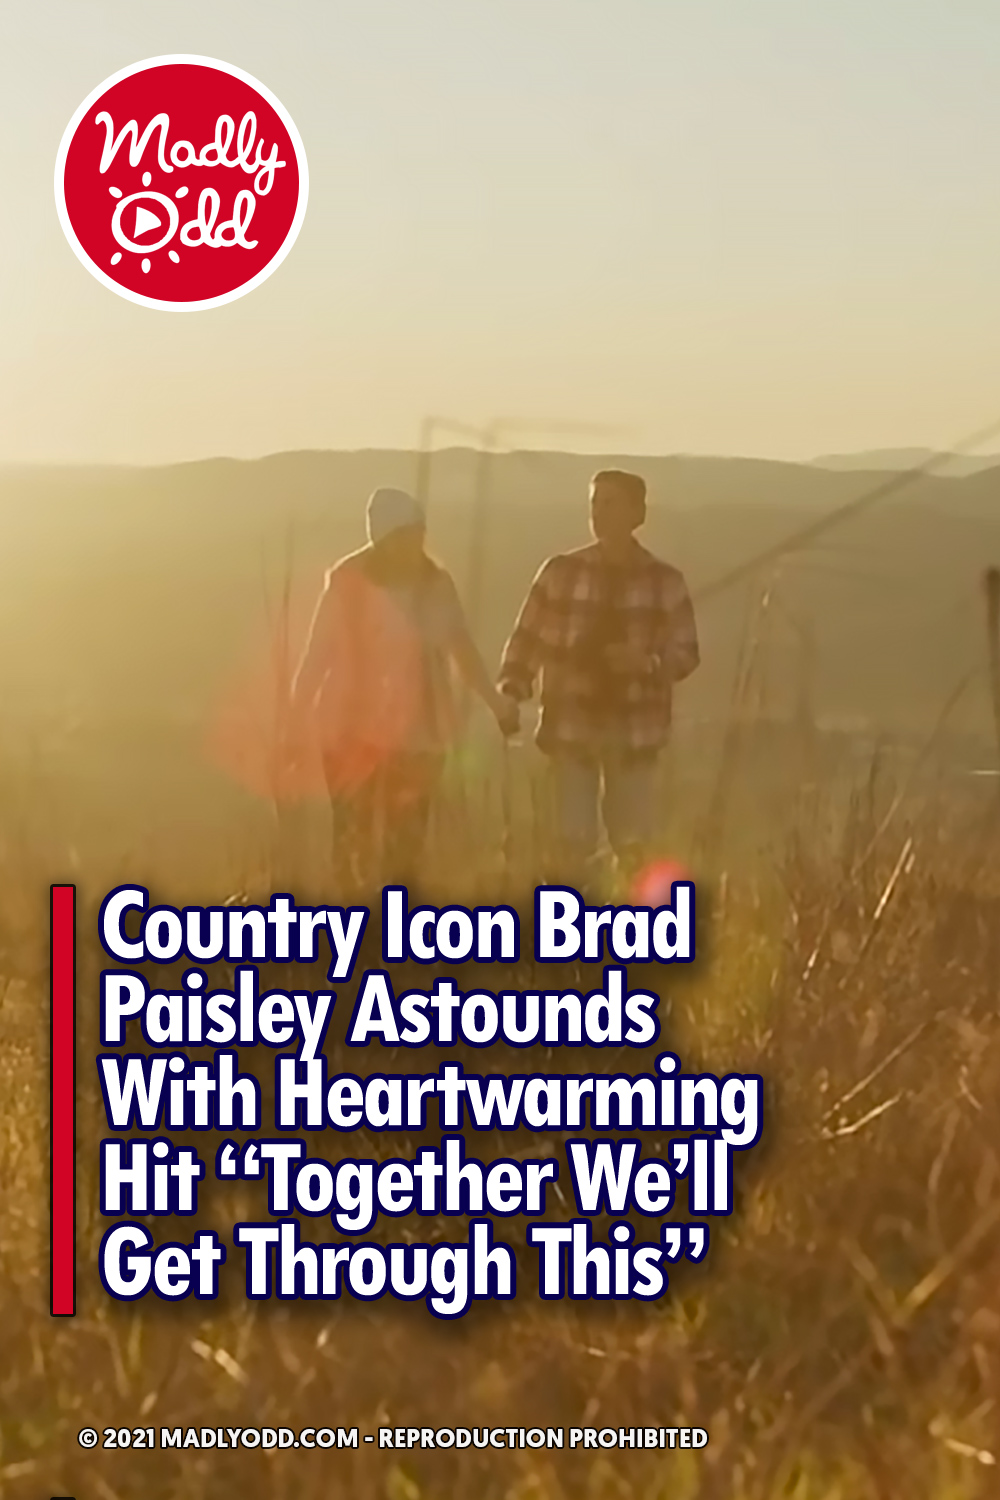 Country Icon Brad Paisley Astounds With Heartwarming Hit “Together We’ll Get Through This”